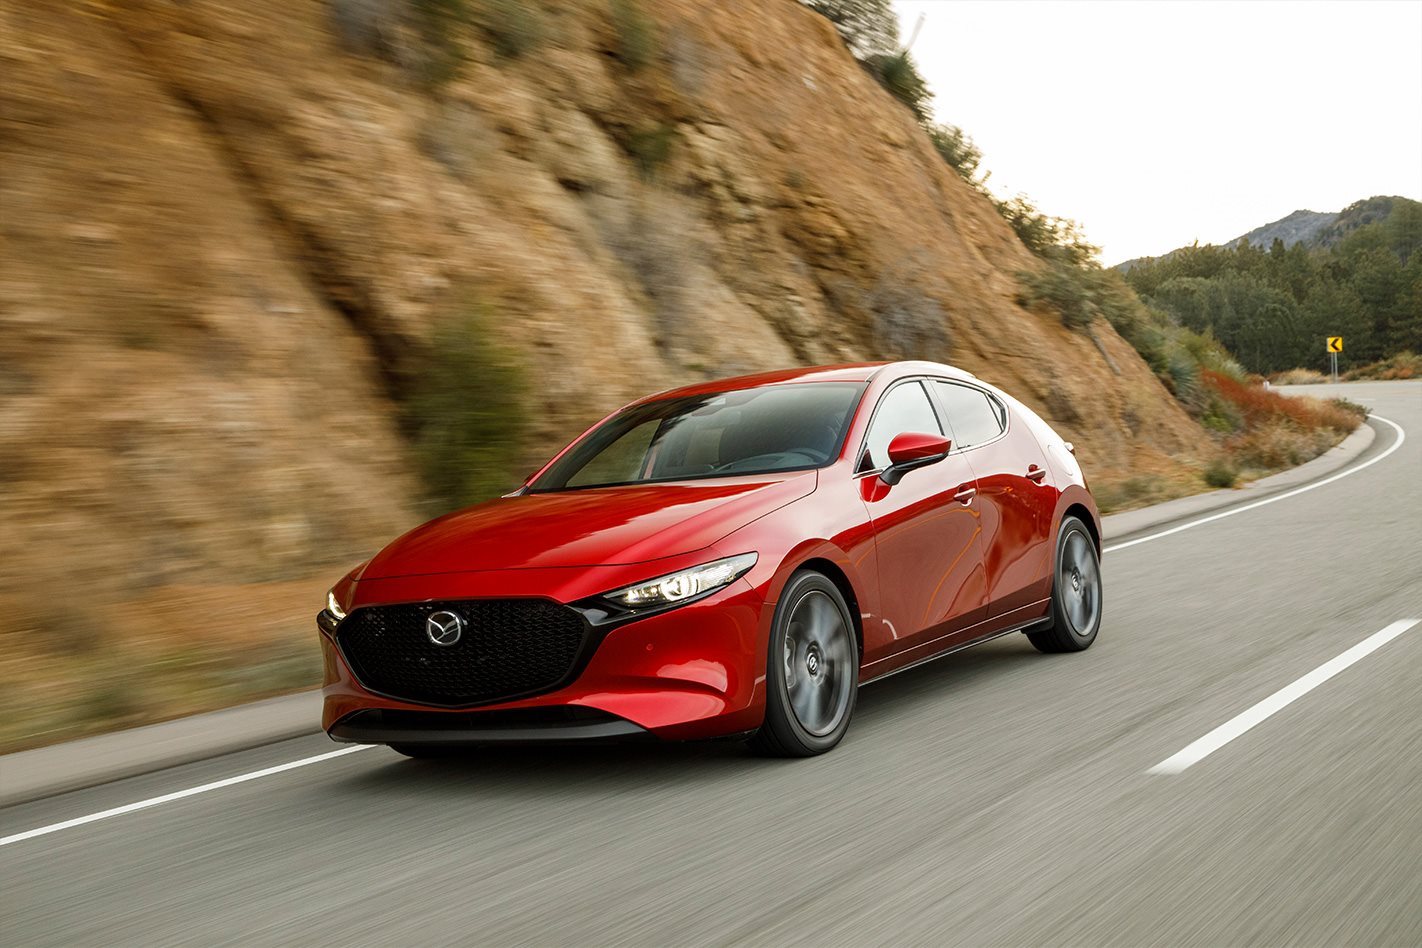 2019 Mazda 3 pricing and specification revealed